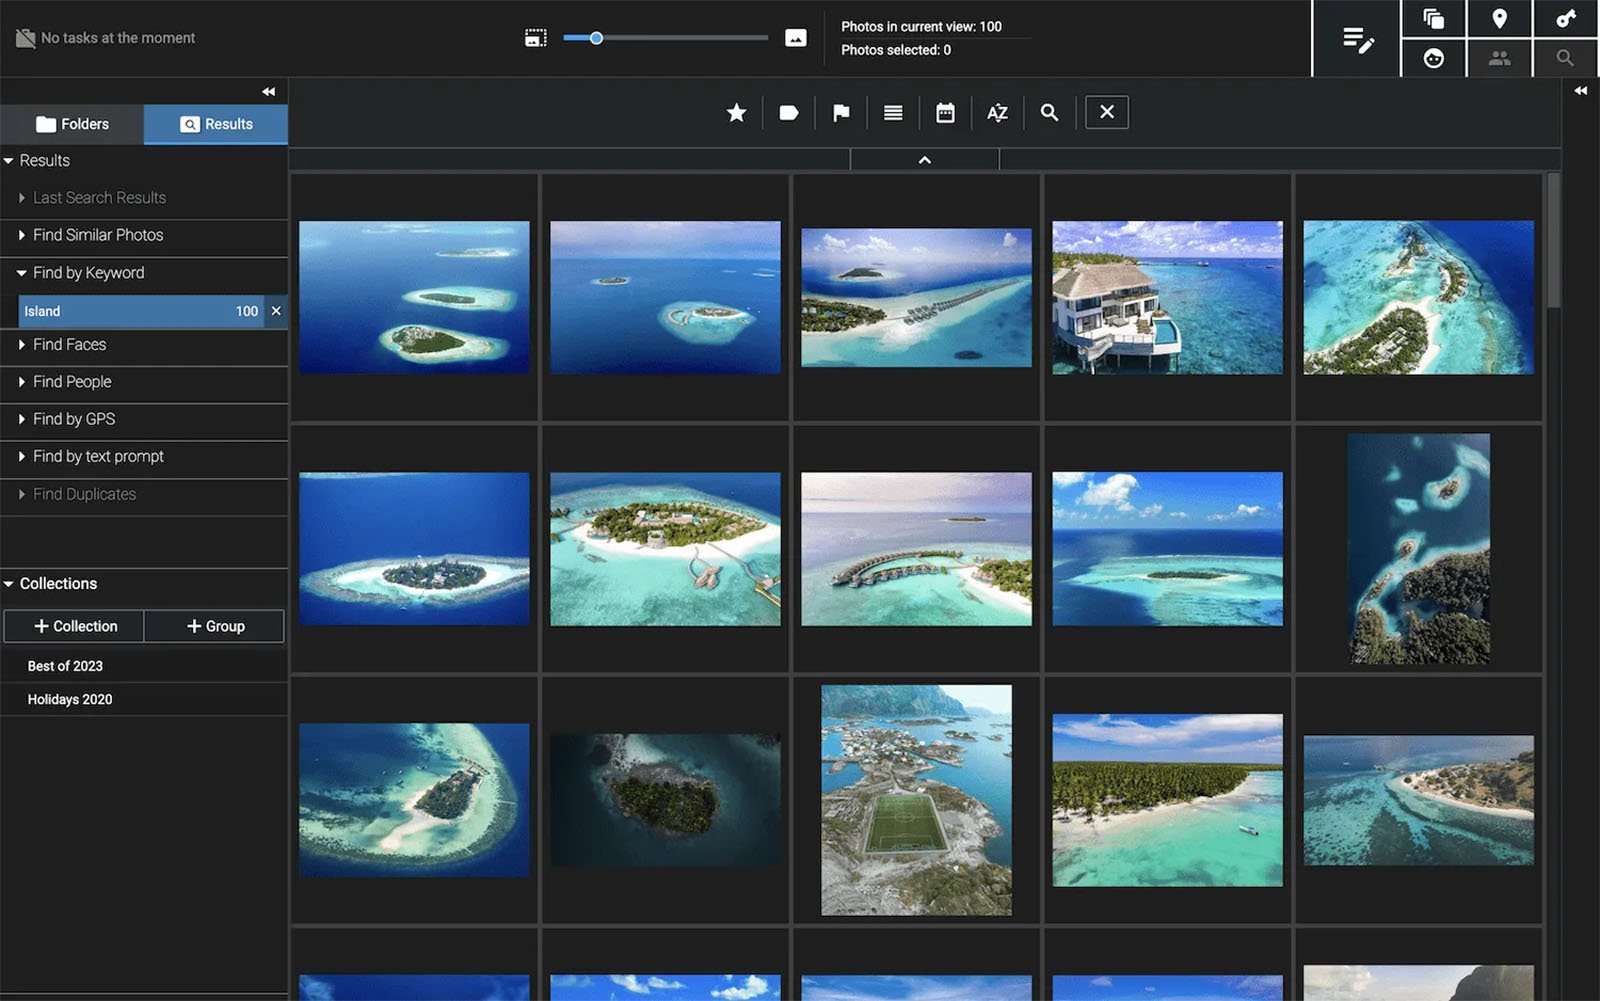 A computer screen displaying a grid of thumbnail images showing various aerial views of tropical islands with vibrant blue waters and lush greenery.